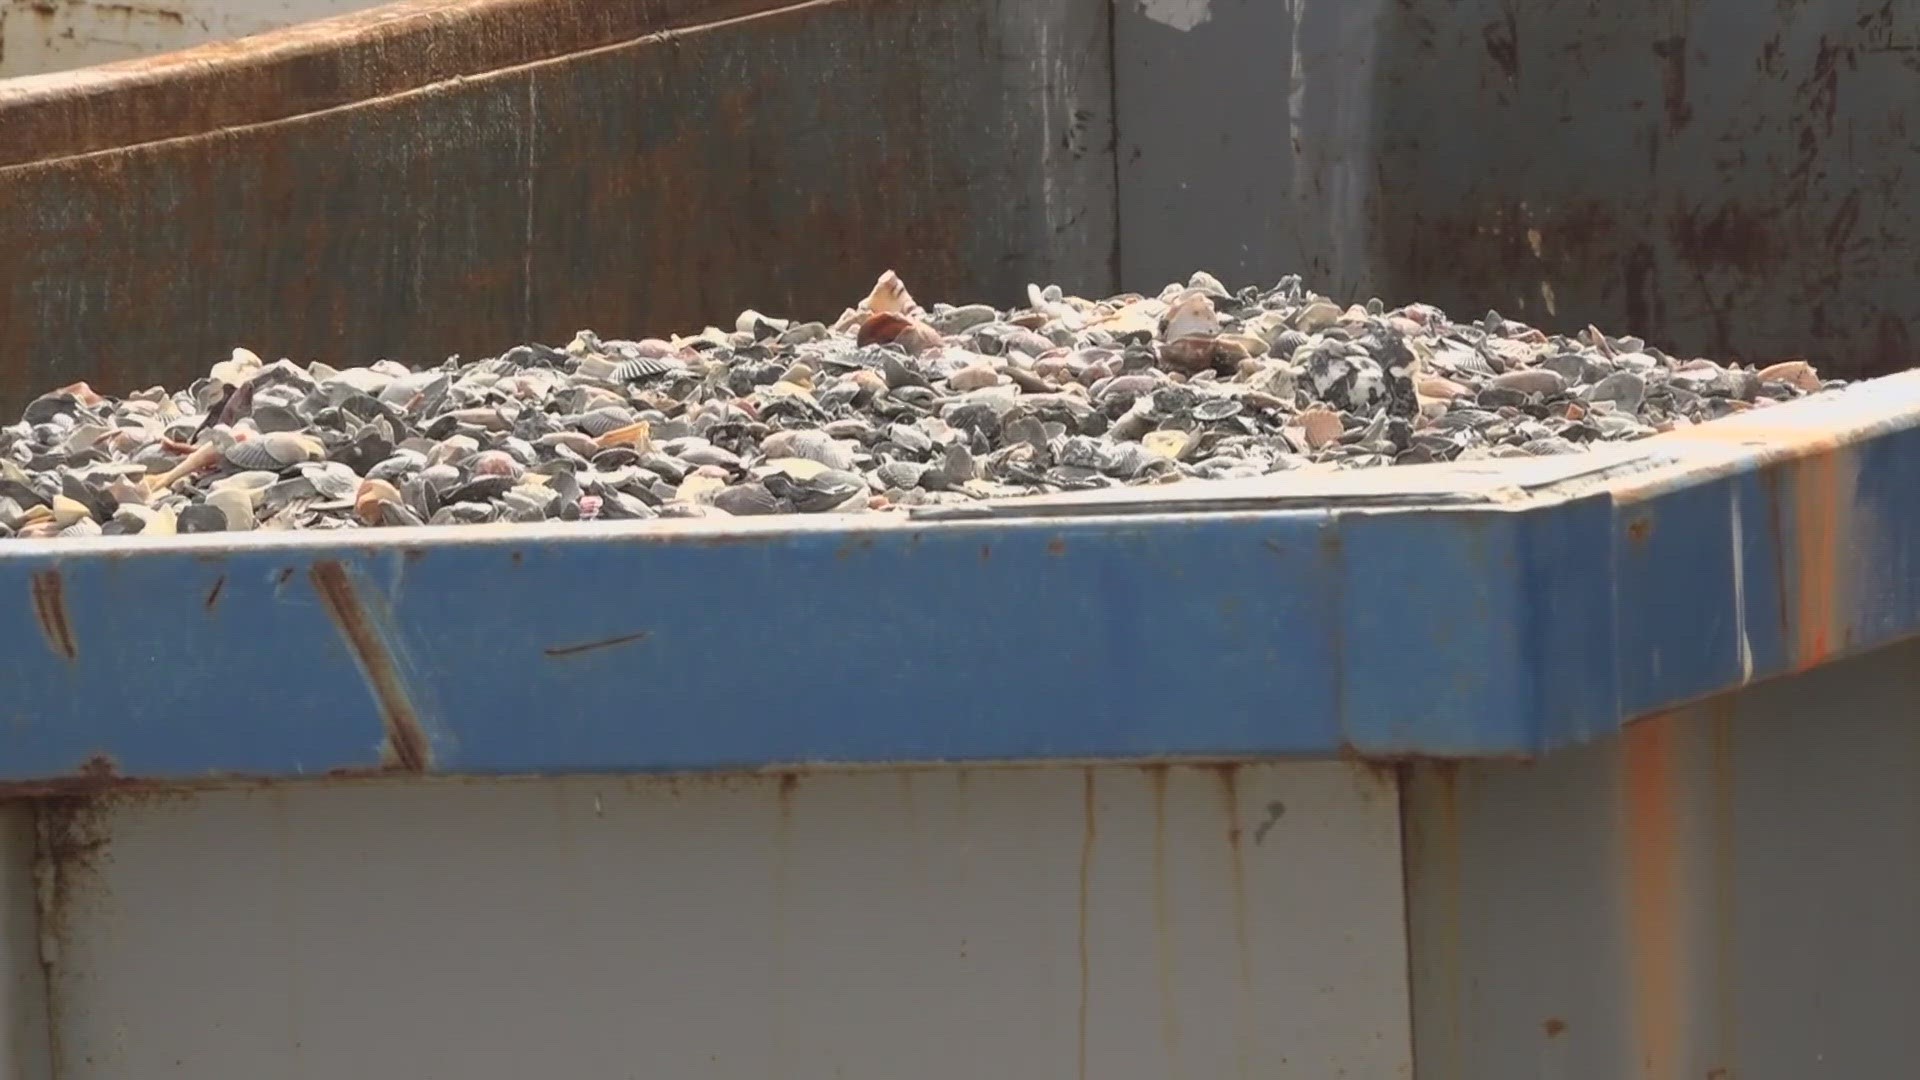 Biologist "devastated" about thousands of shells - some of them with live animals inside -- found in dumpsters in Vilano Beach.